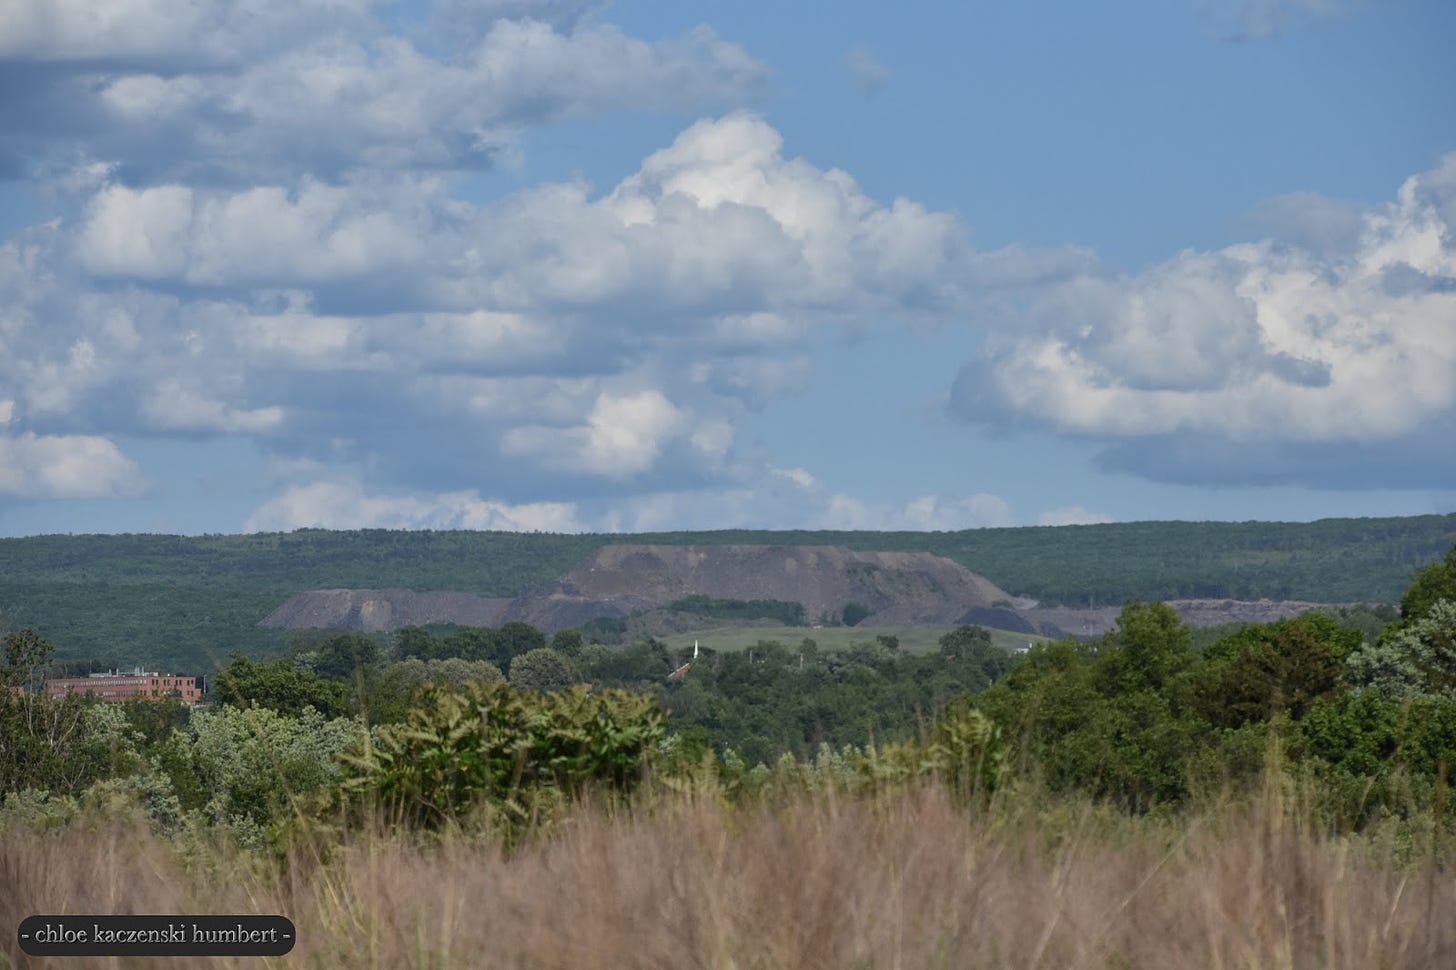 View of the Keystone Landfill garbage dump mountain in Dunmore seen from across the Lackawanna River valley to the west in a field off the Leggetts Creek Greenway Trail in the Marvine neighborhood of north Scranton Pennsylvania. Photo by Chloe Kaczenski Humbert. June 9, 2017. Alt image text: It’s a bright day with low puffy cumulous clouds in the sky. The dump is seen as a bare earth set of hills set against the tree covered mountains behind it, and trees and tall grass is in the foreground, with the steeple peaking up from the valley among the trees from the church on University Drive in Dunmore, and the Dawson Building at Penn State Scranton Campus in Dunmore Pennsylvania, on the left. 